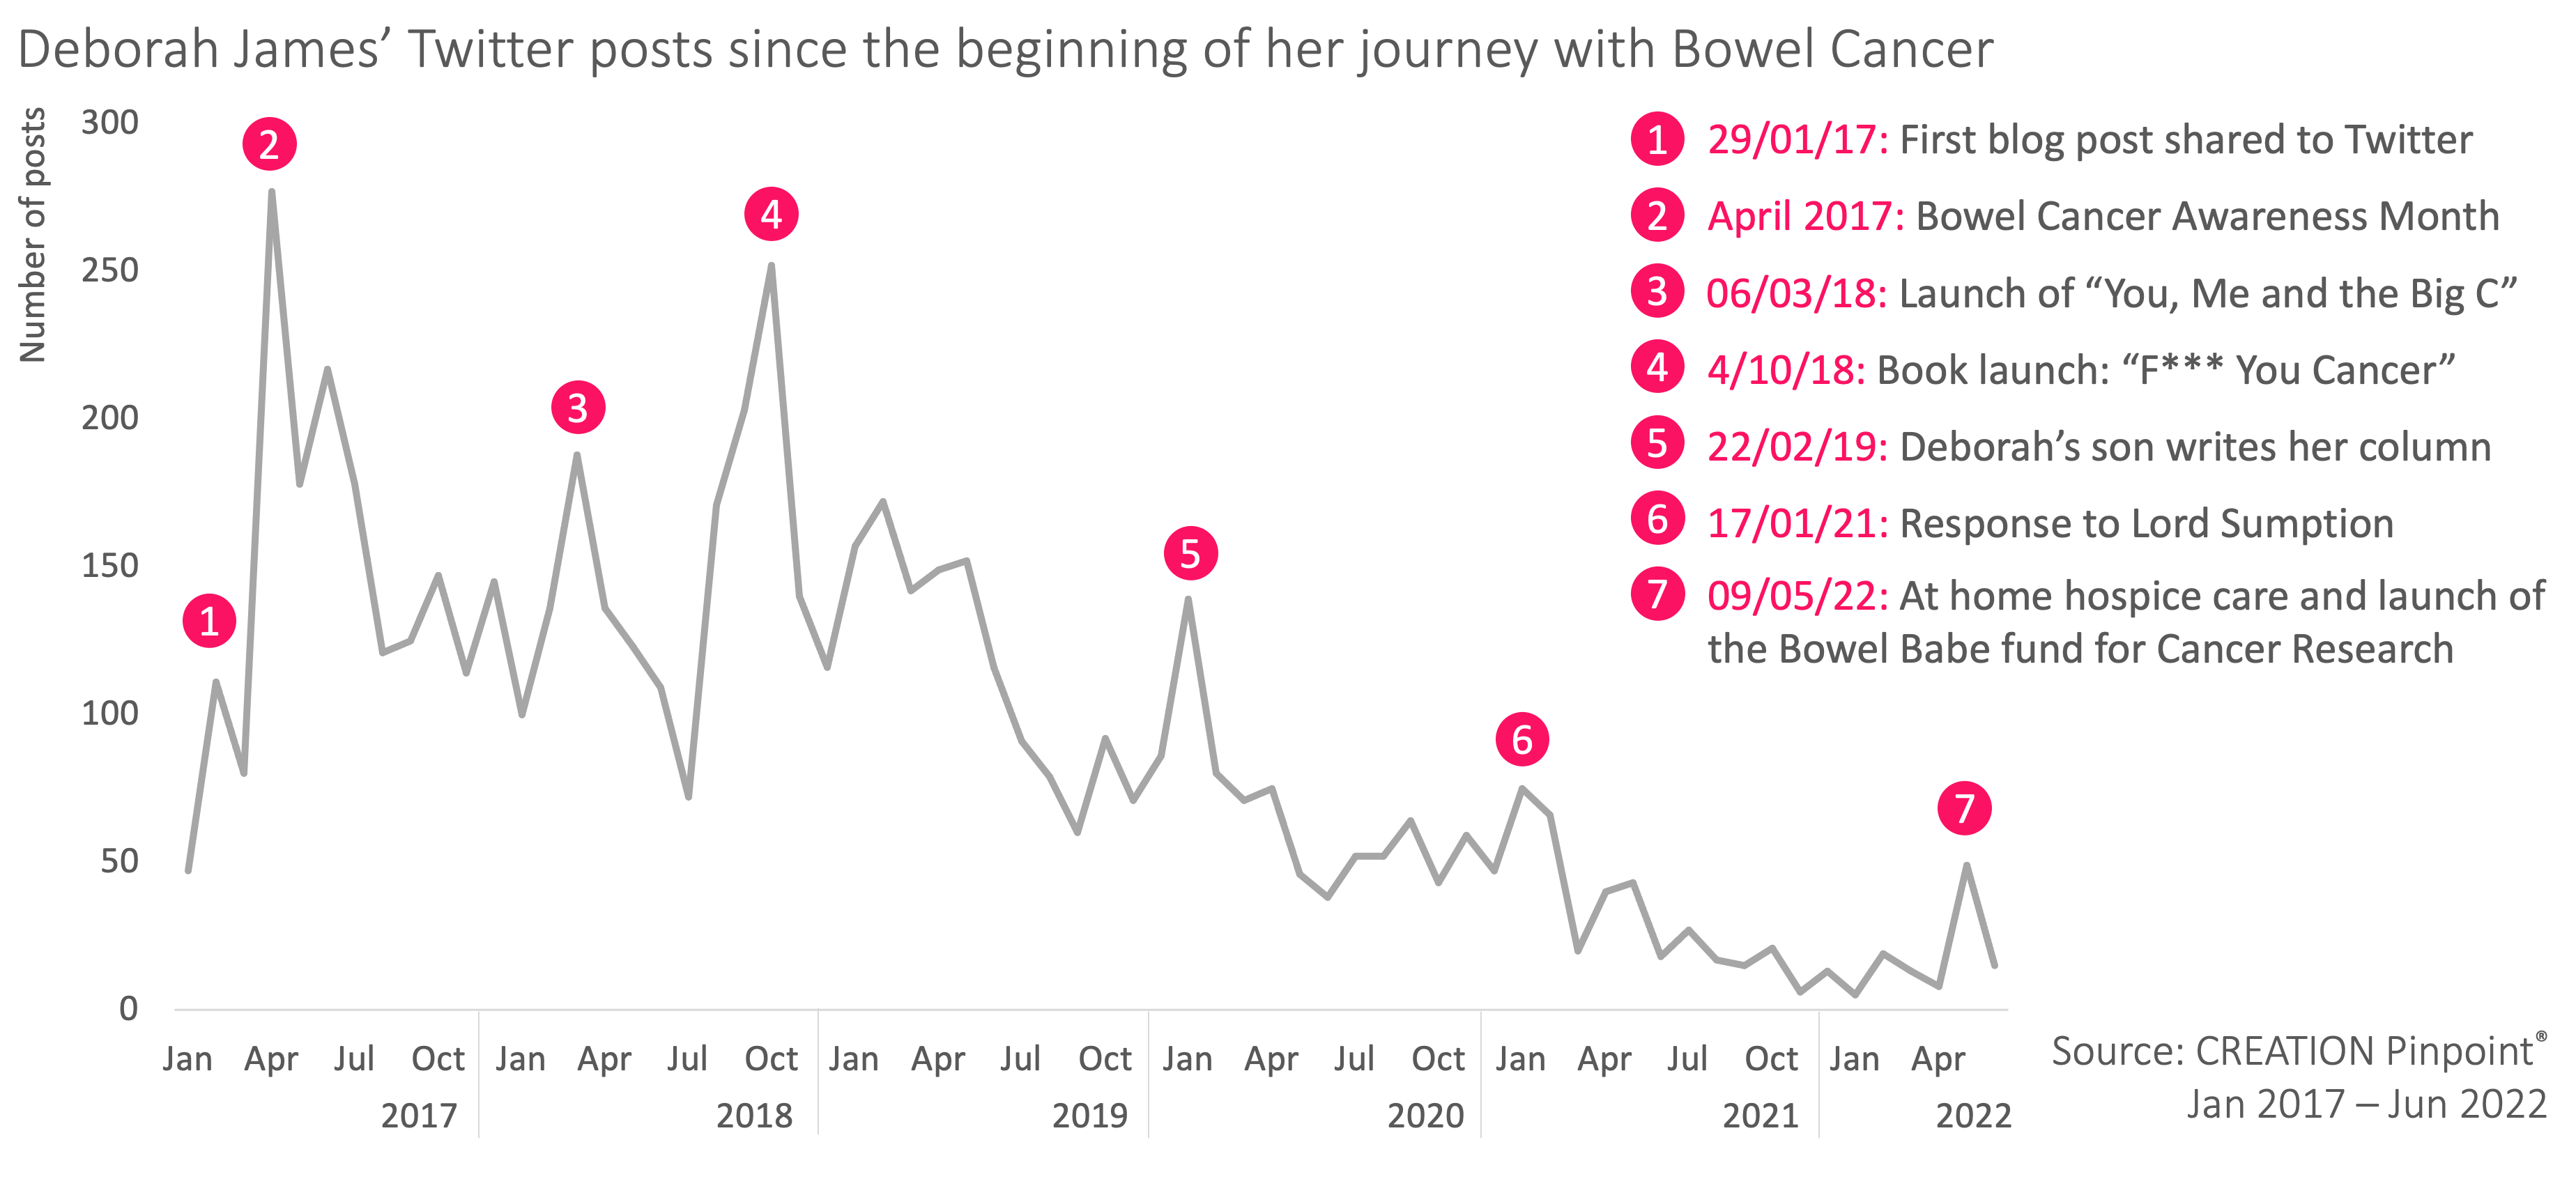 MOT graph showing Deborah James' twitter posts since the beginning of her journey with Bowel Cancer